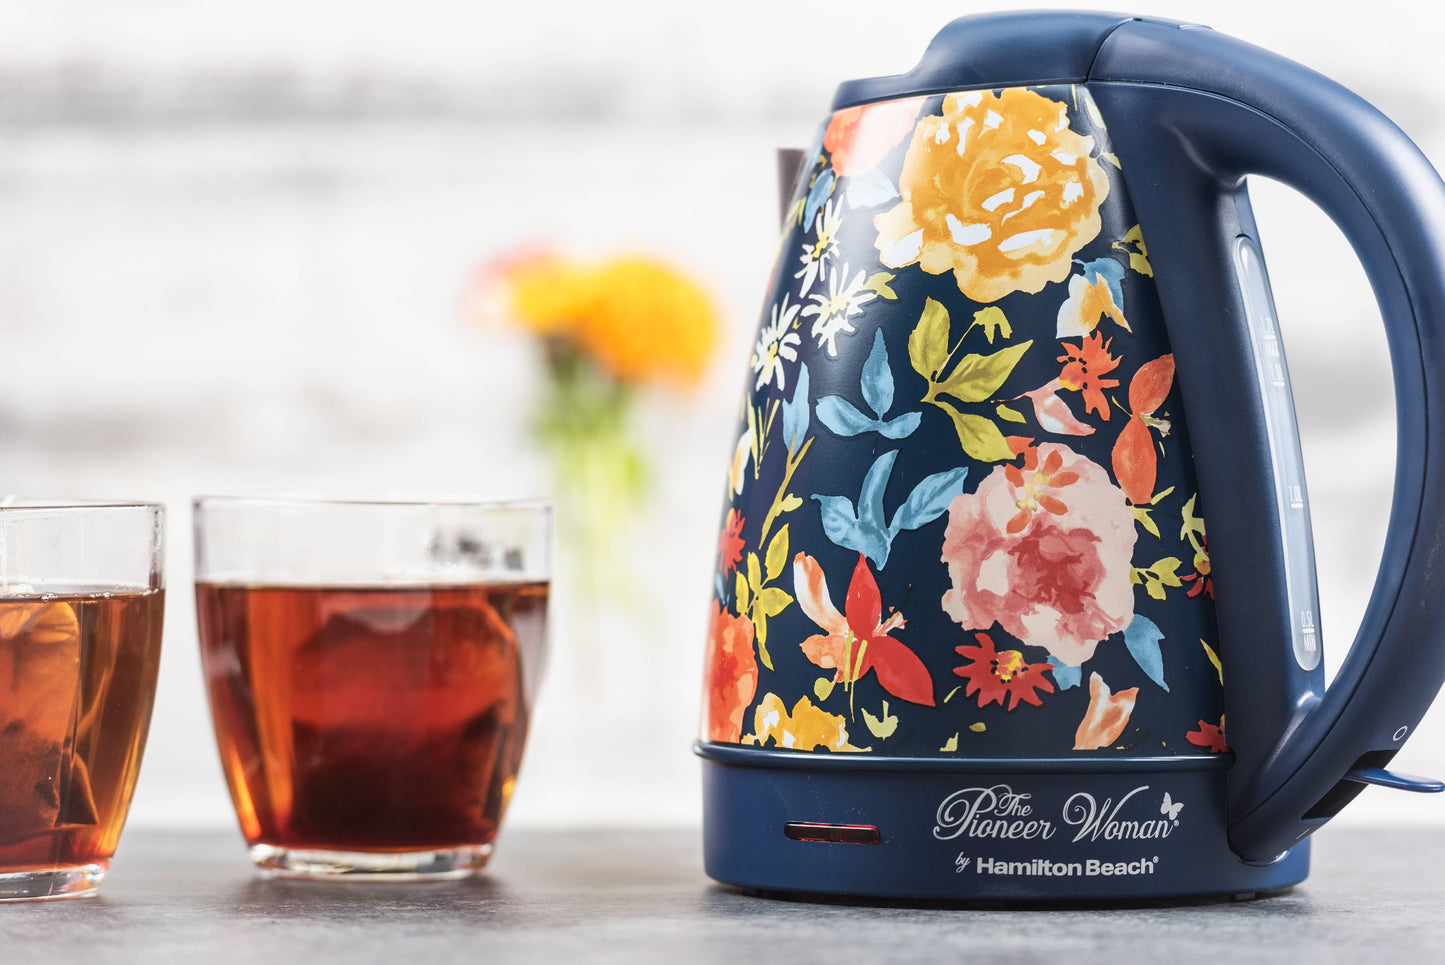 The Pioneer Woman Fiona Floral Blue, Electric Kettle, 1.7-Liter, Model 40971